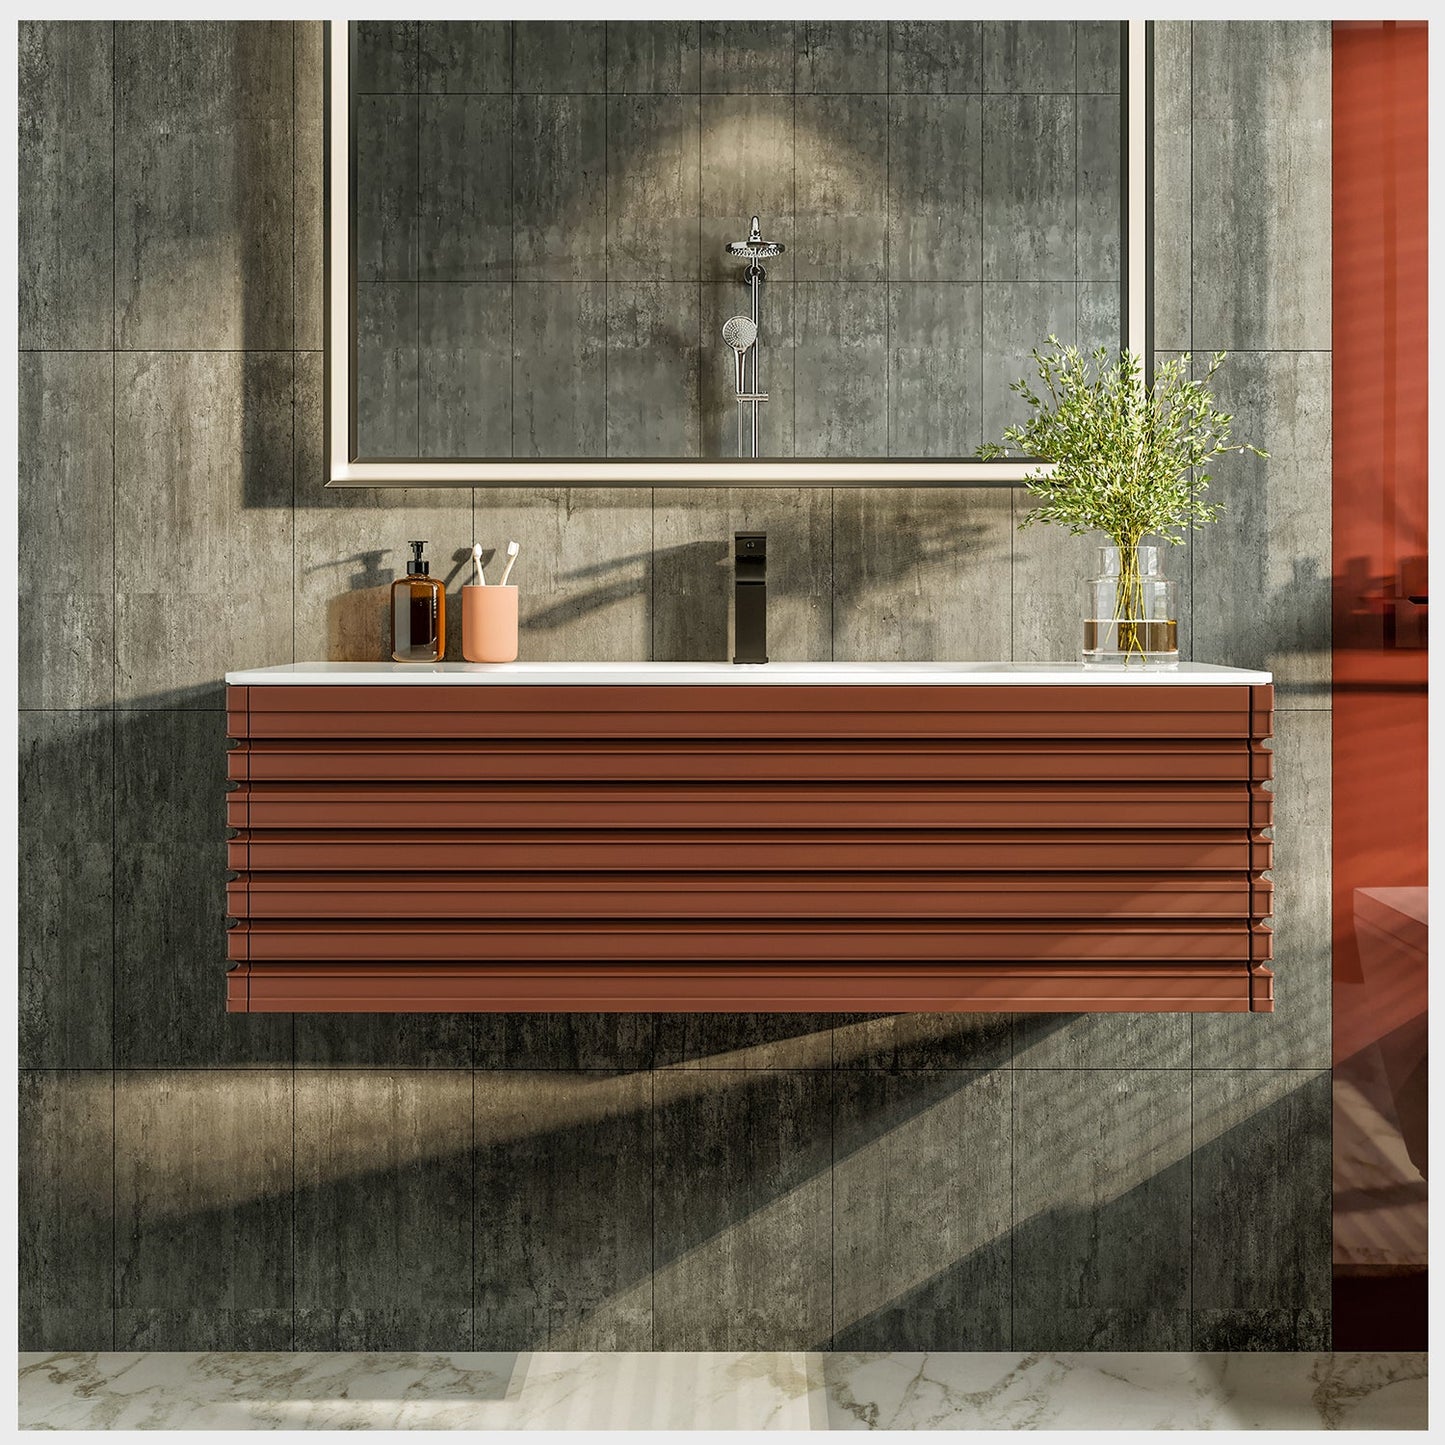 Eviva Dream 42 Terracotta Wall Mount Vanity with Solid Surface Integrated Sink